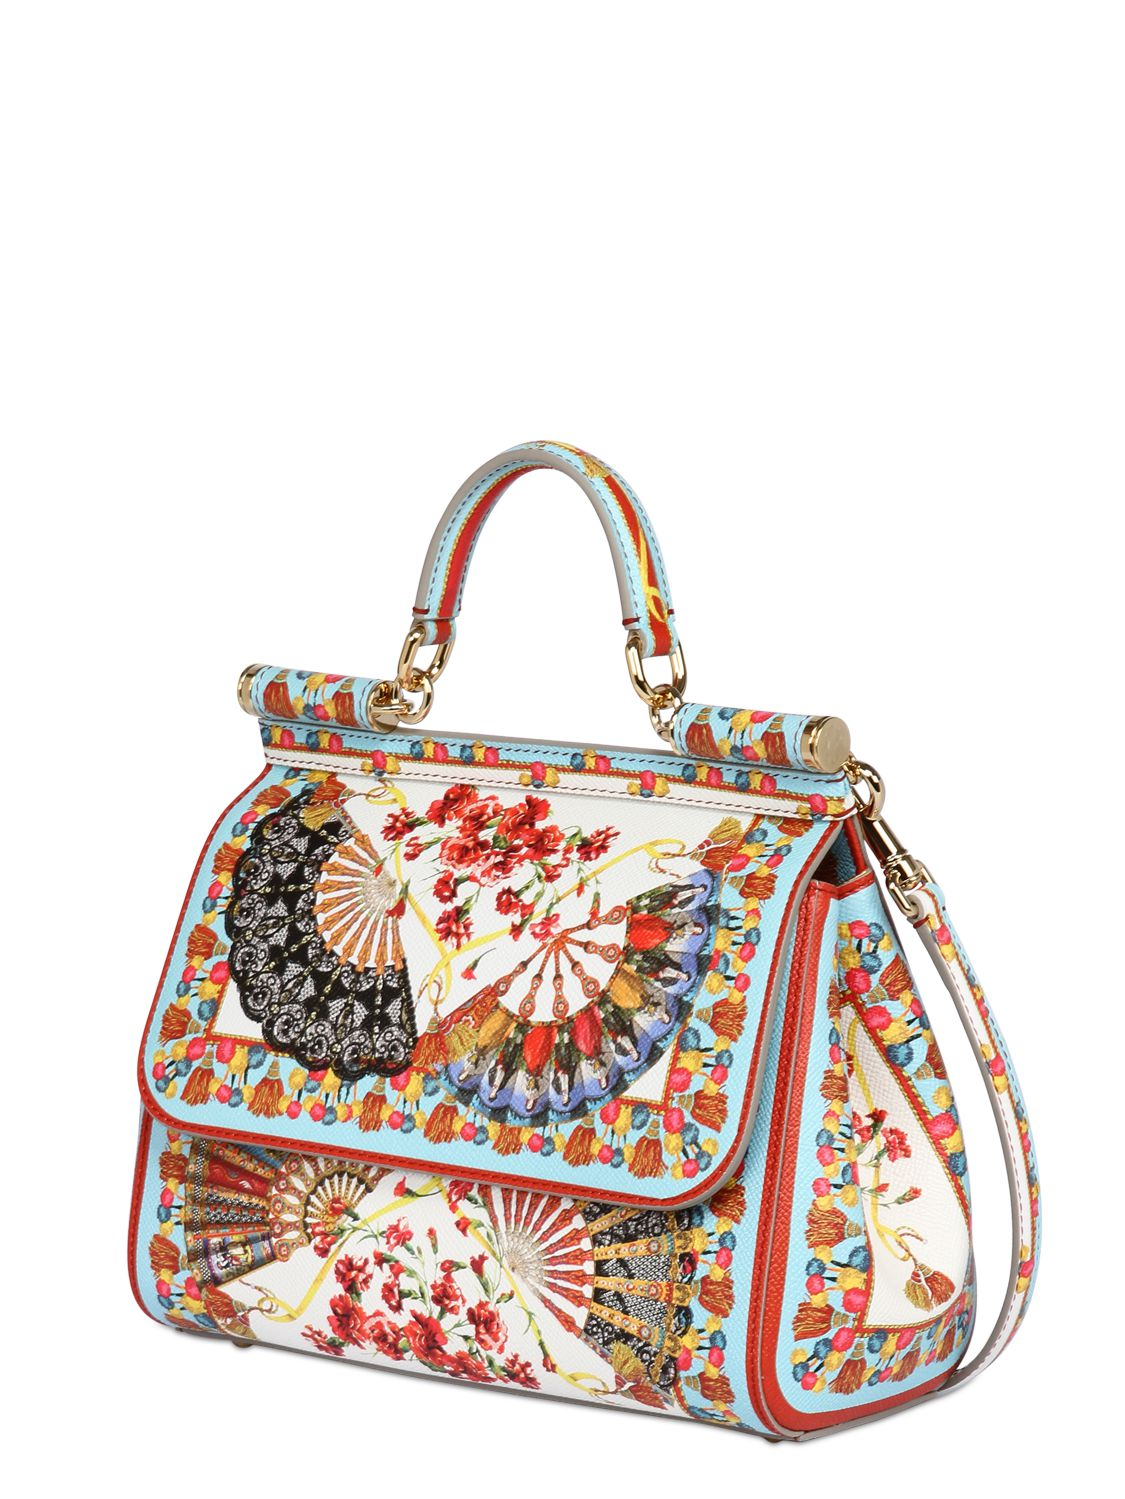 Lyst - Dolce & Gabbana Sicily Medium Printed Textured-leather Tote in White